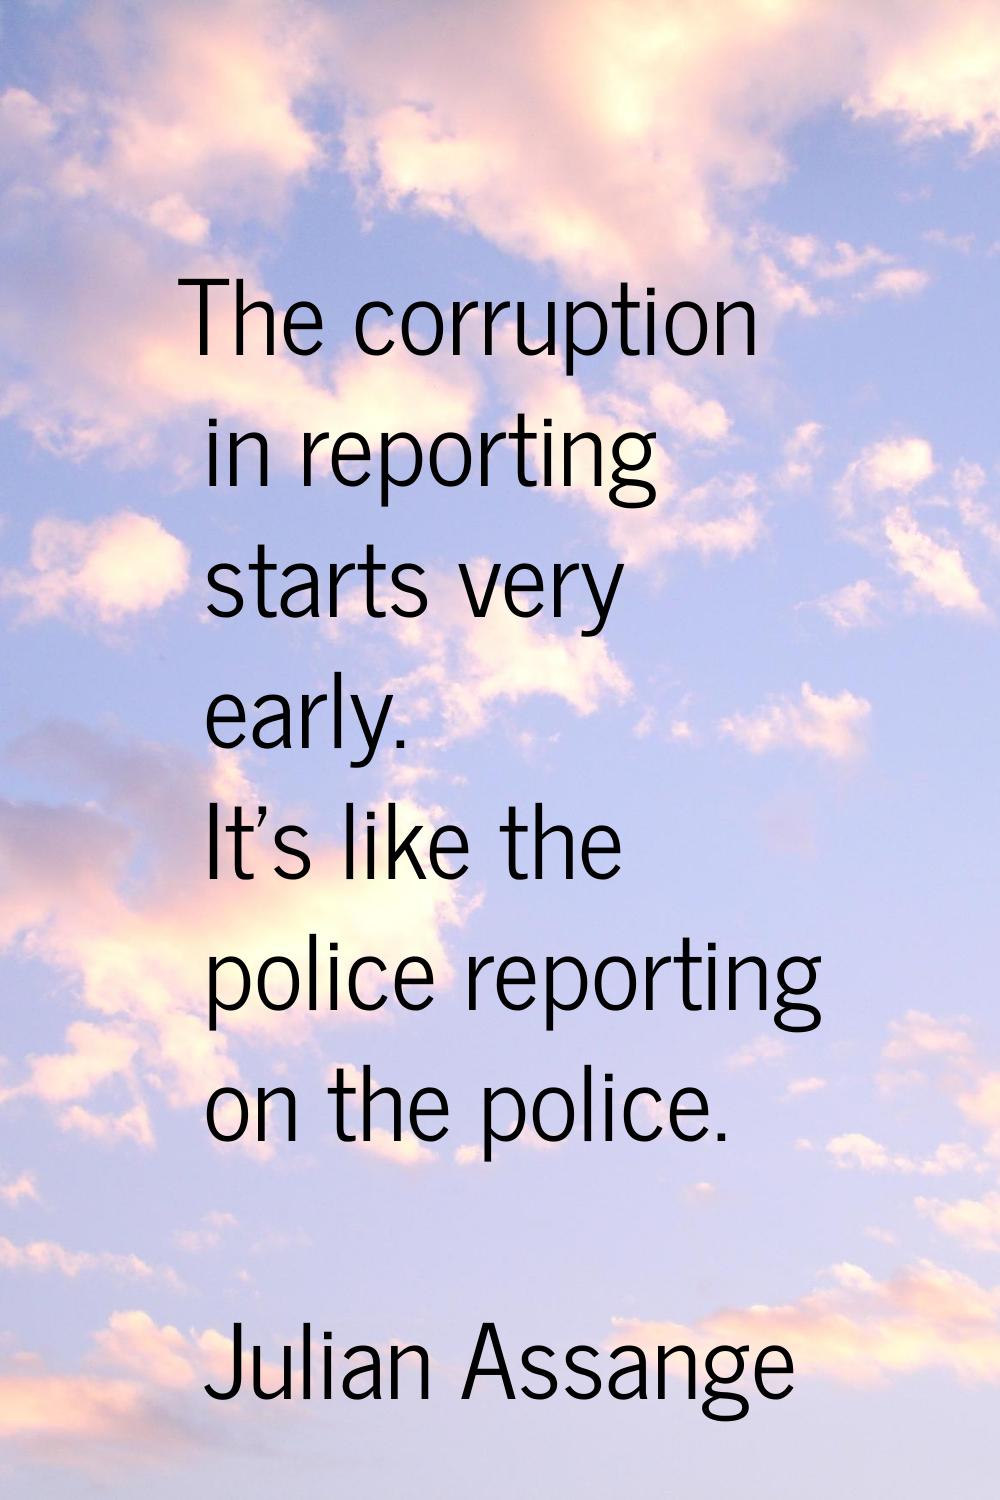 The corruption in reporting starts very early. It's like the police reporting on the police.